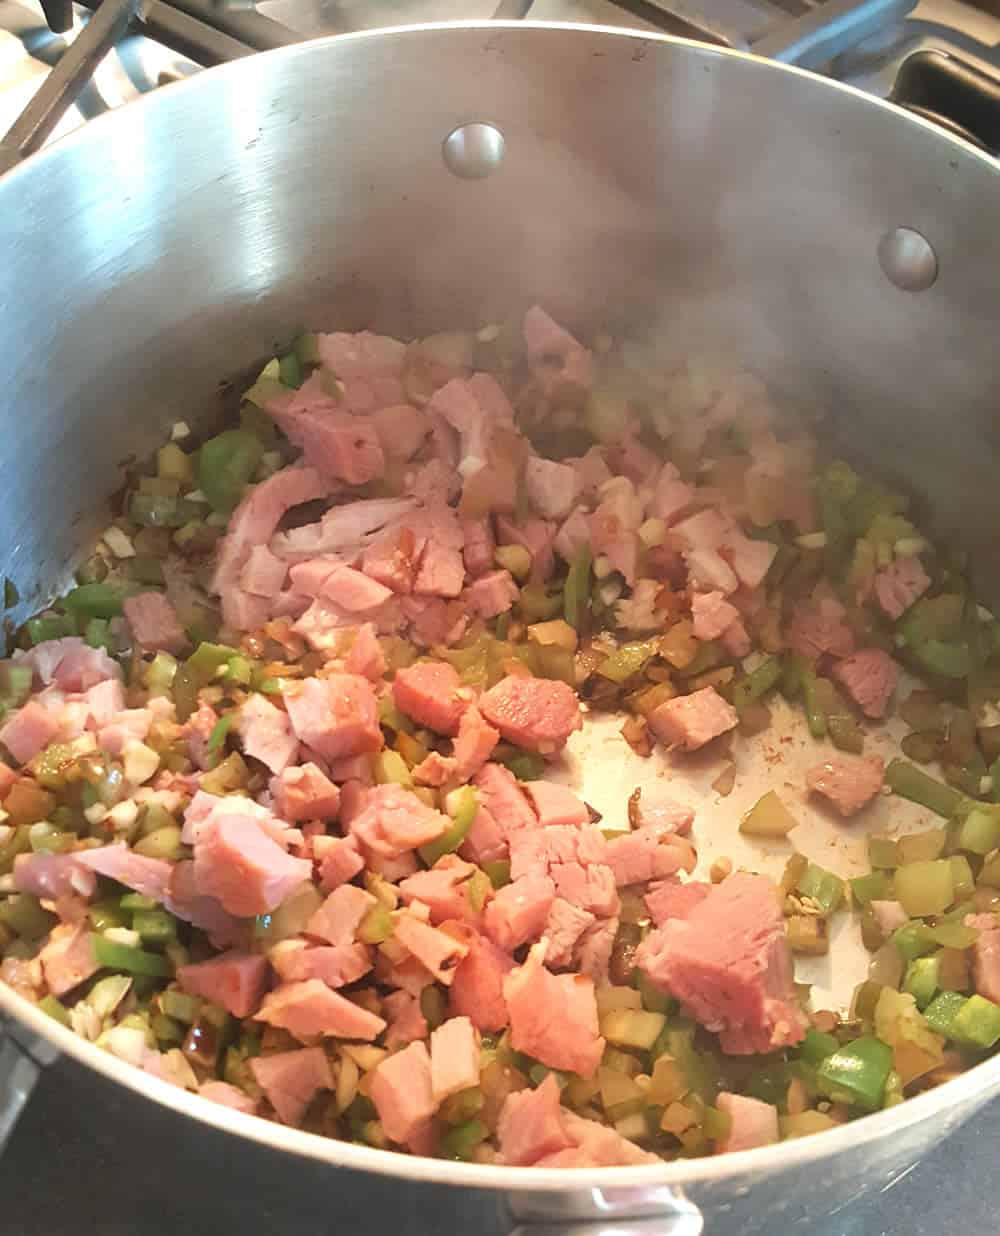 Ham added to the pot to make our Red Beans and Rice - Recipe